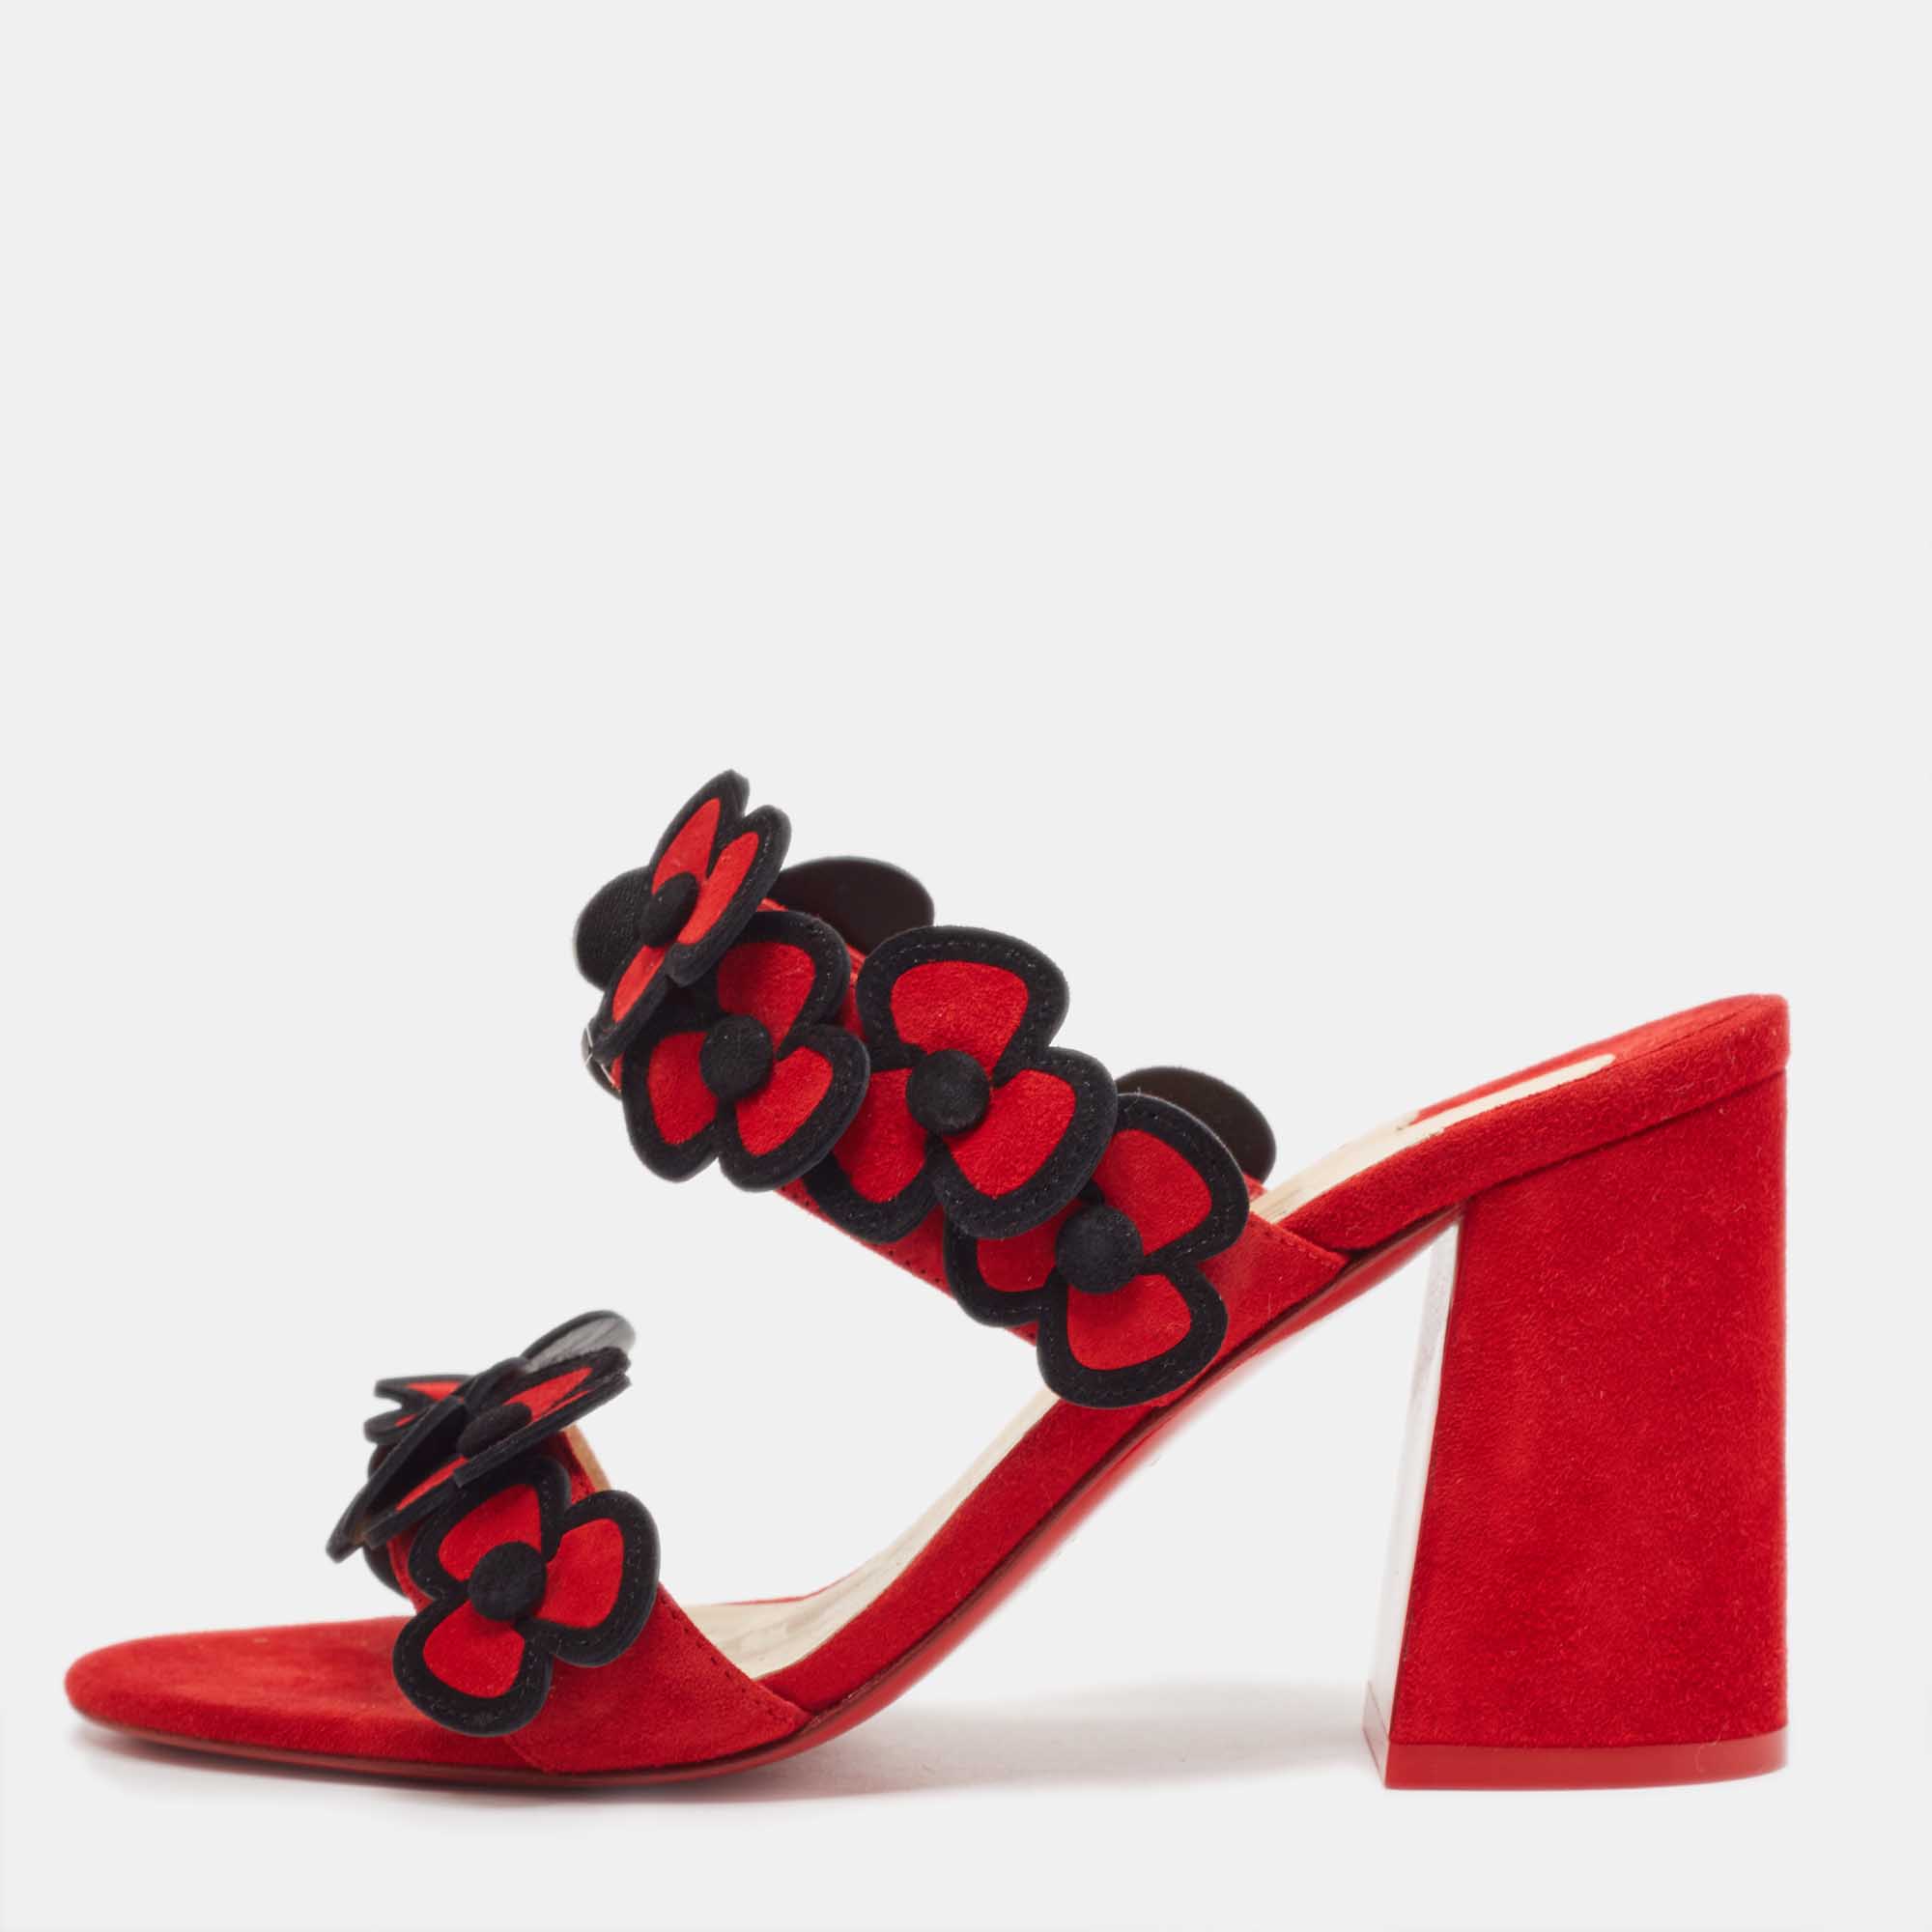 Christian Louboutin Red/Black Suede Pansy Sandals Size 37